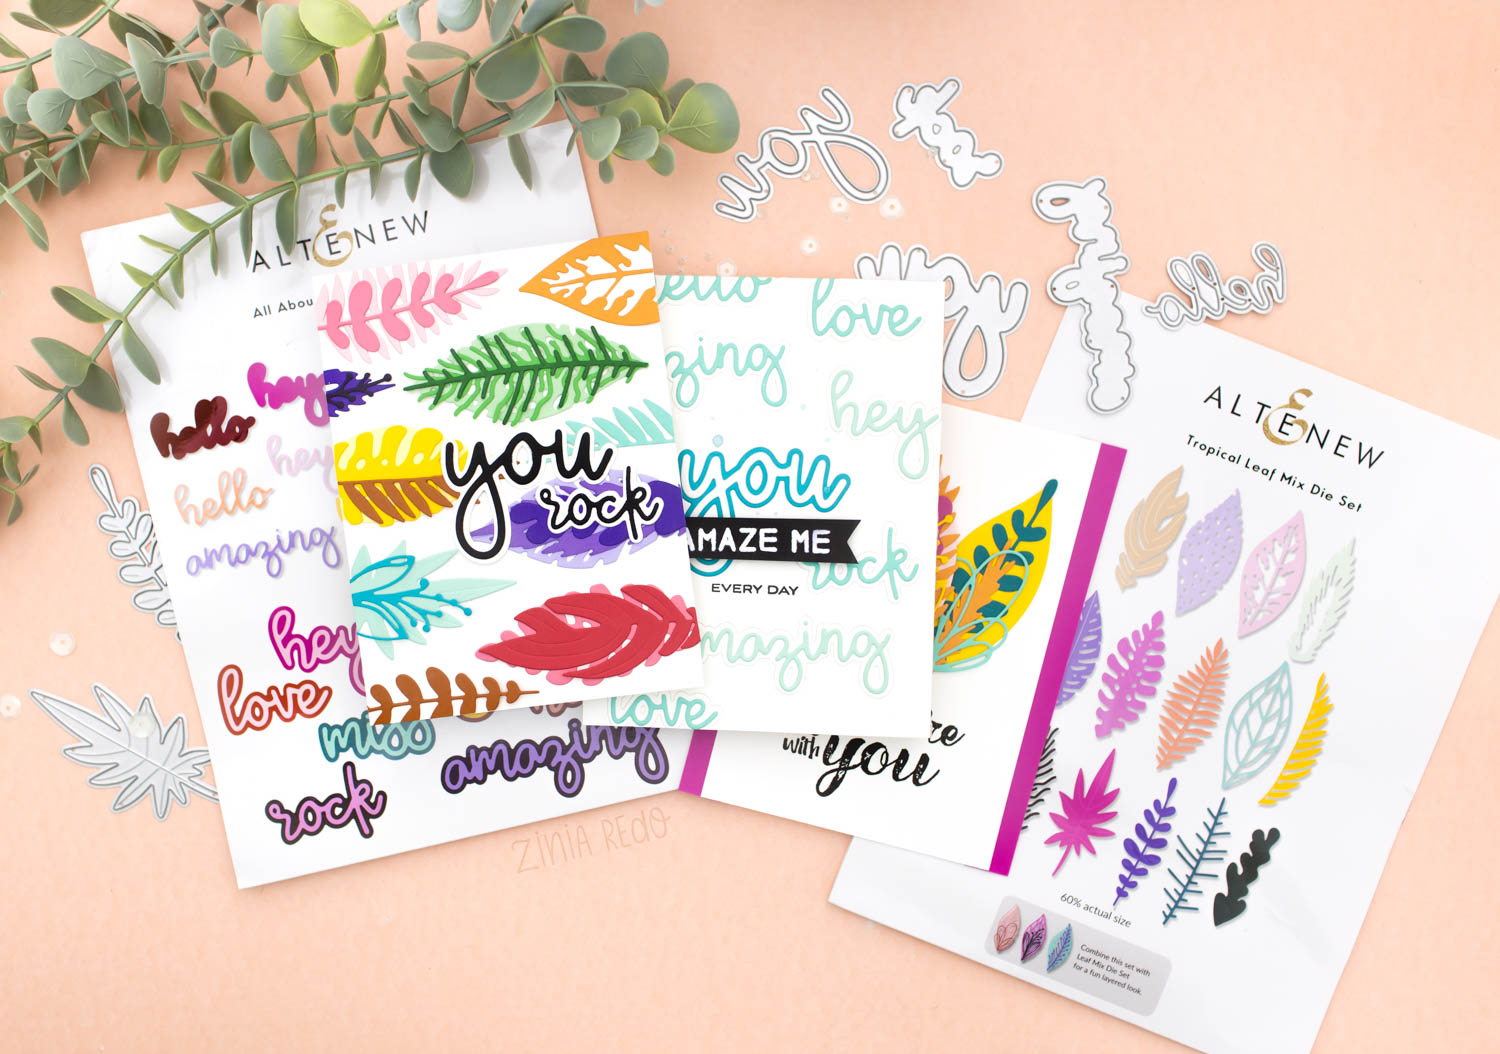 Zinia Redo Designs Altenew Summer Adventure Release - Tropical Leaf Mix & All About You Word Die Set